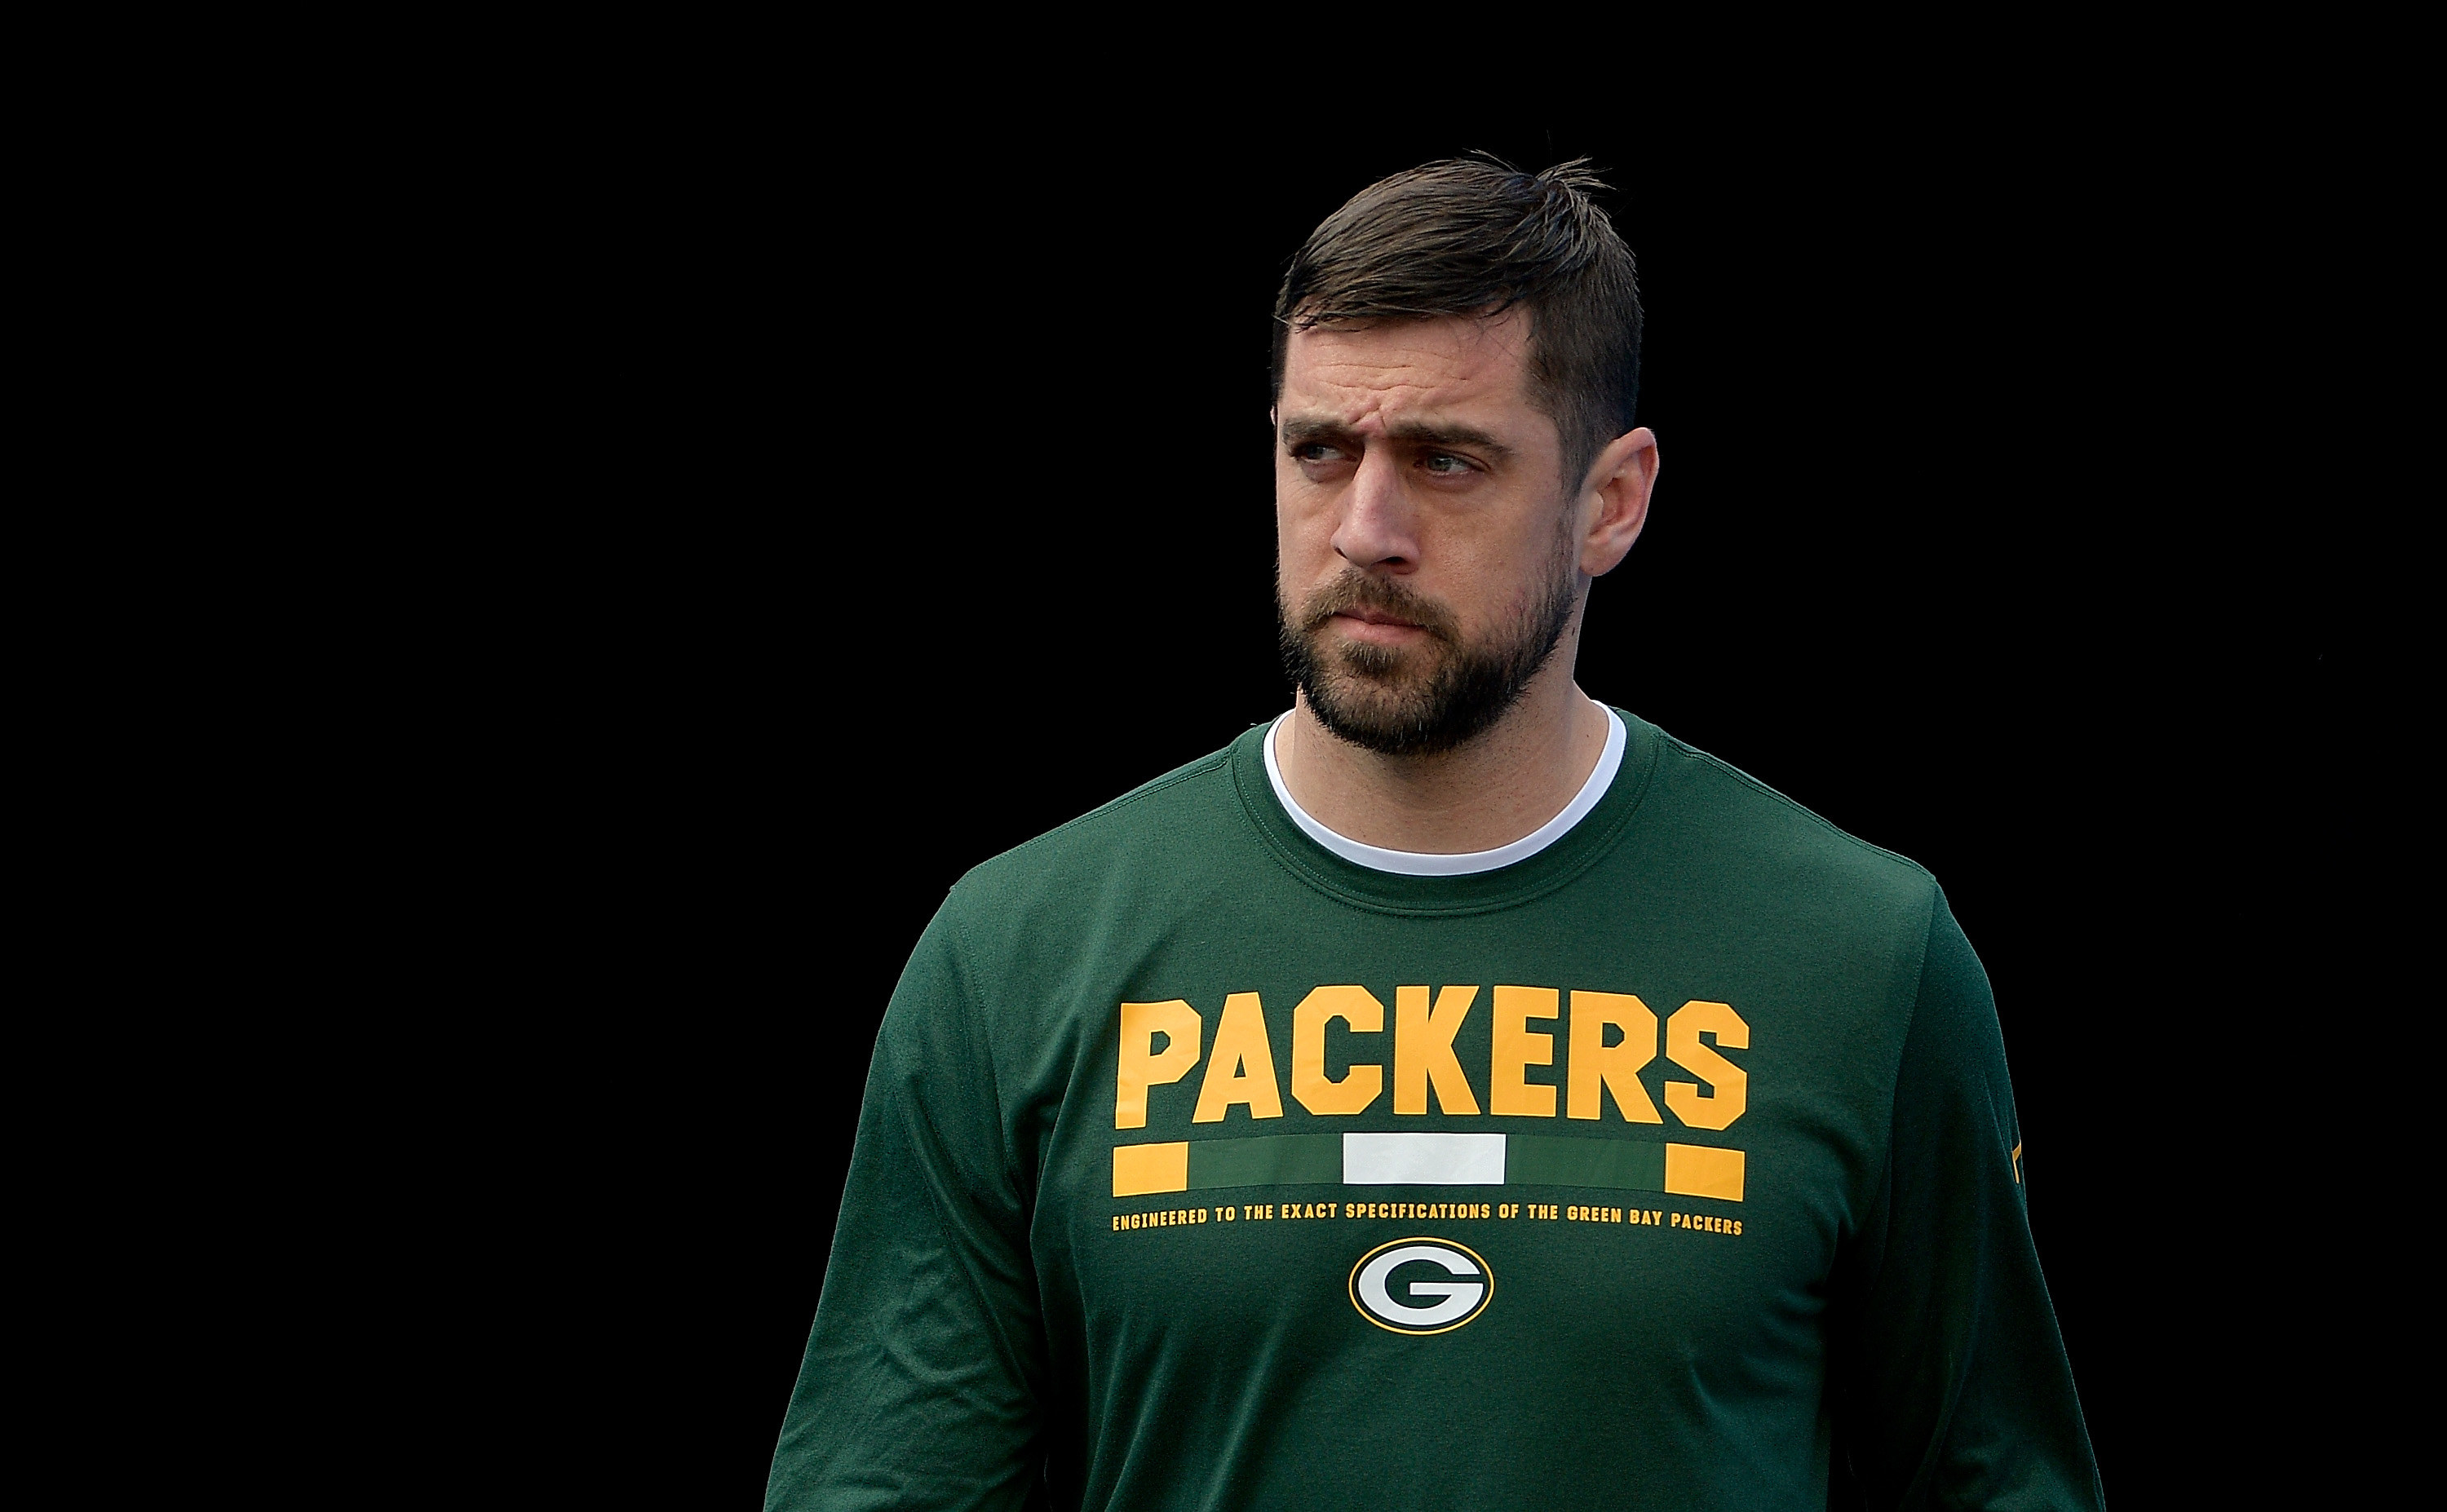 Rodgers looks in the distance while wearing a Packers shirt